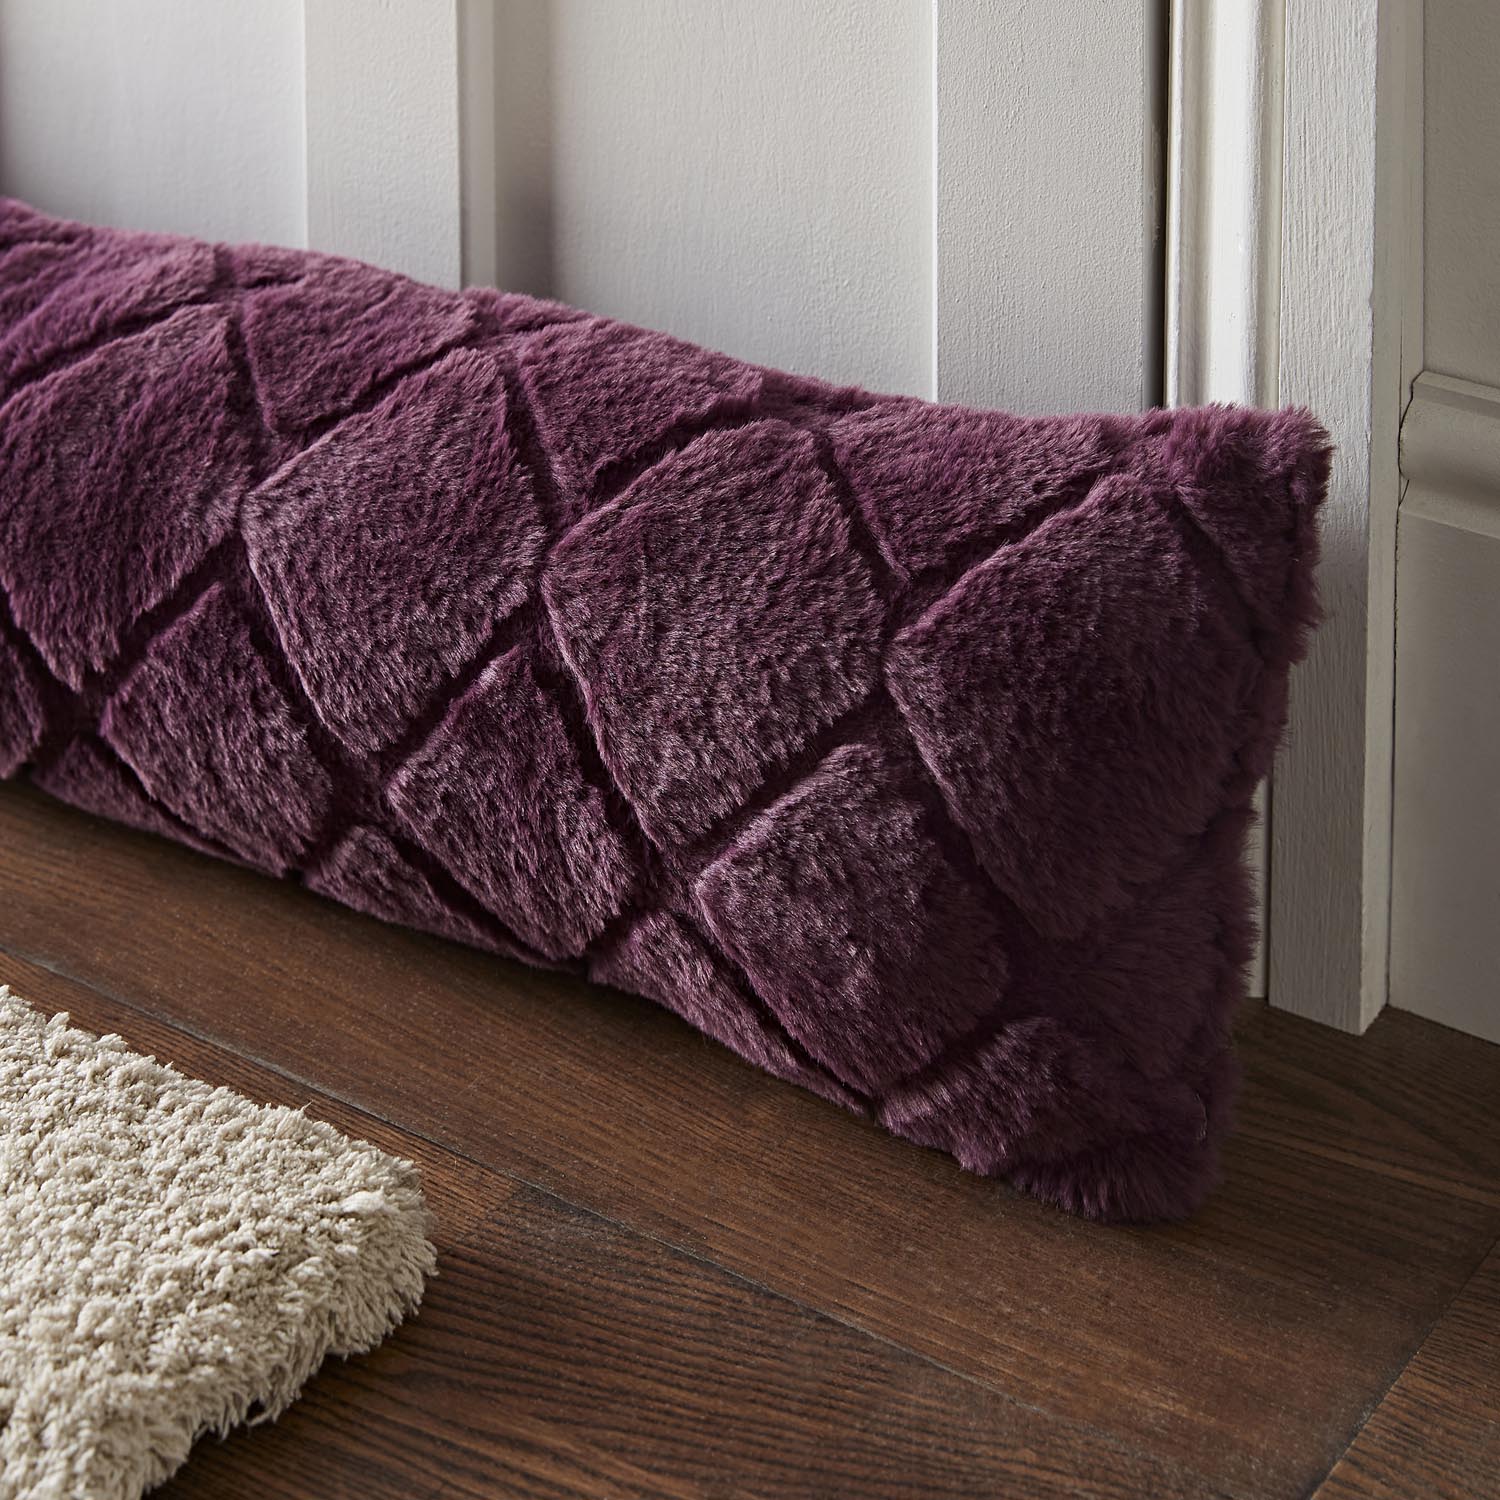 Catherine Lansfield Draught Excluder 90cm x 20cm - Plum 2 Shaws Department Stores